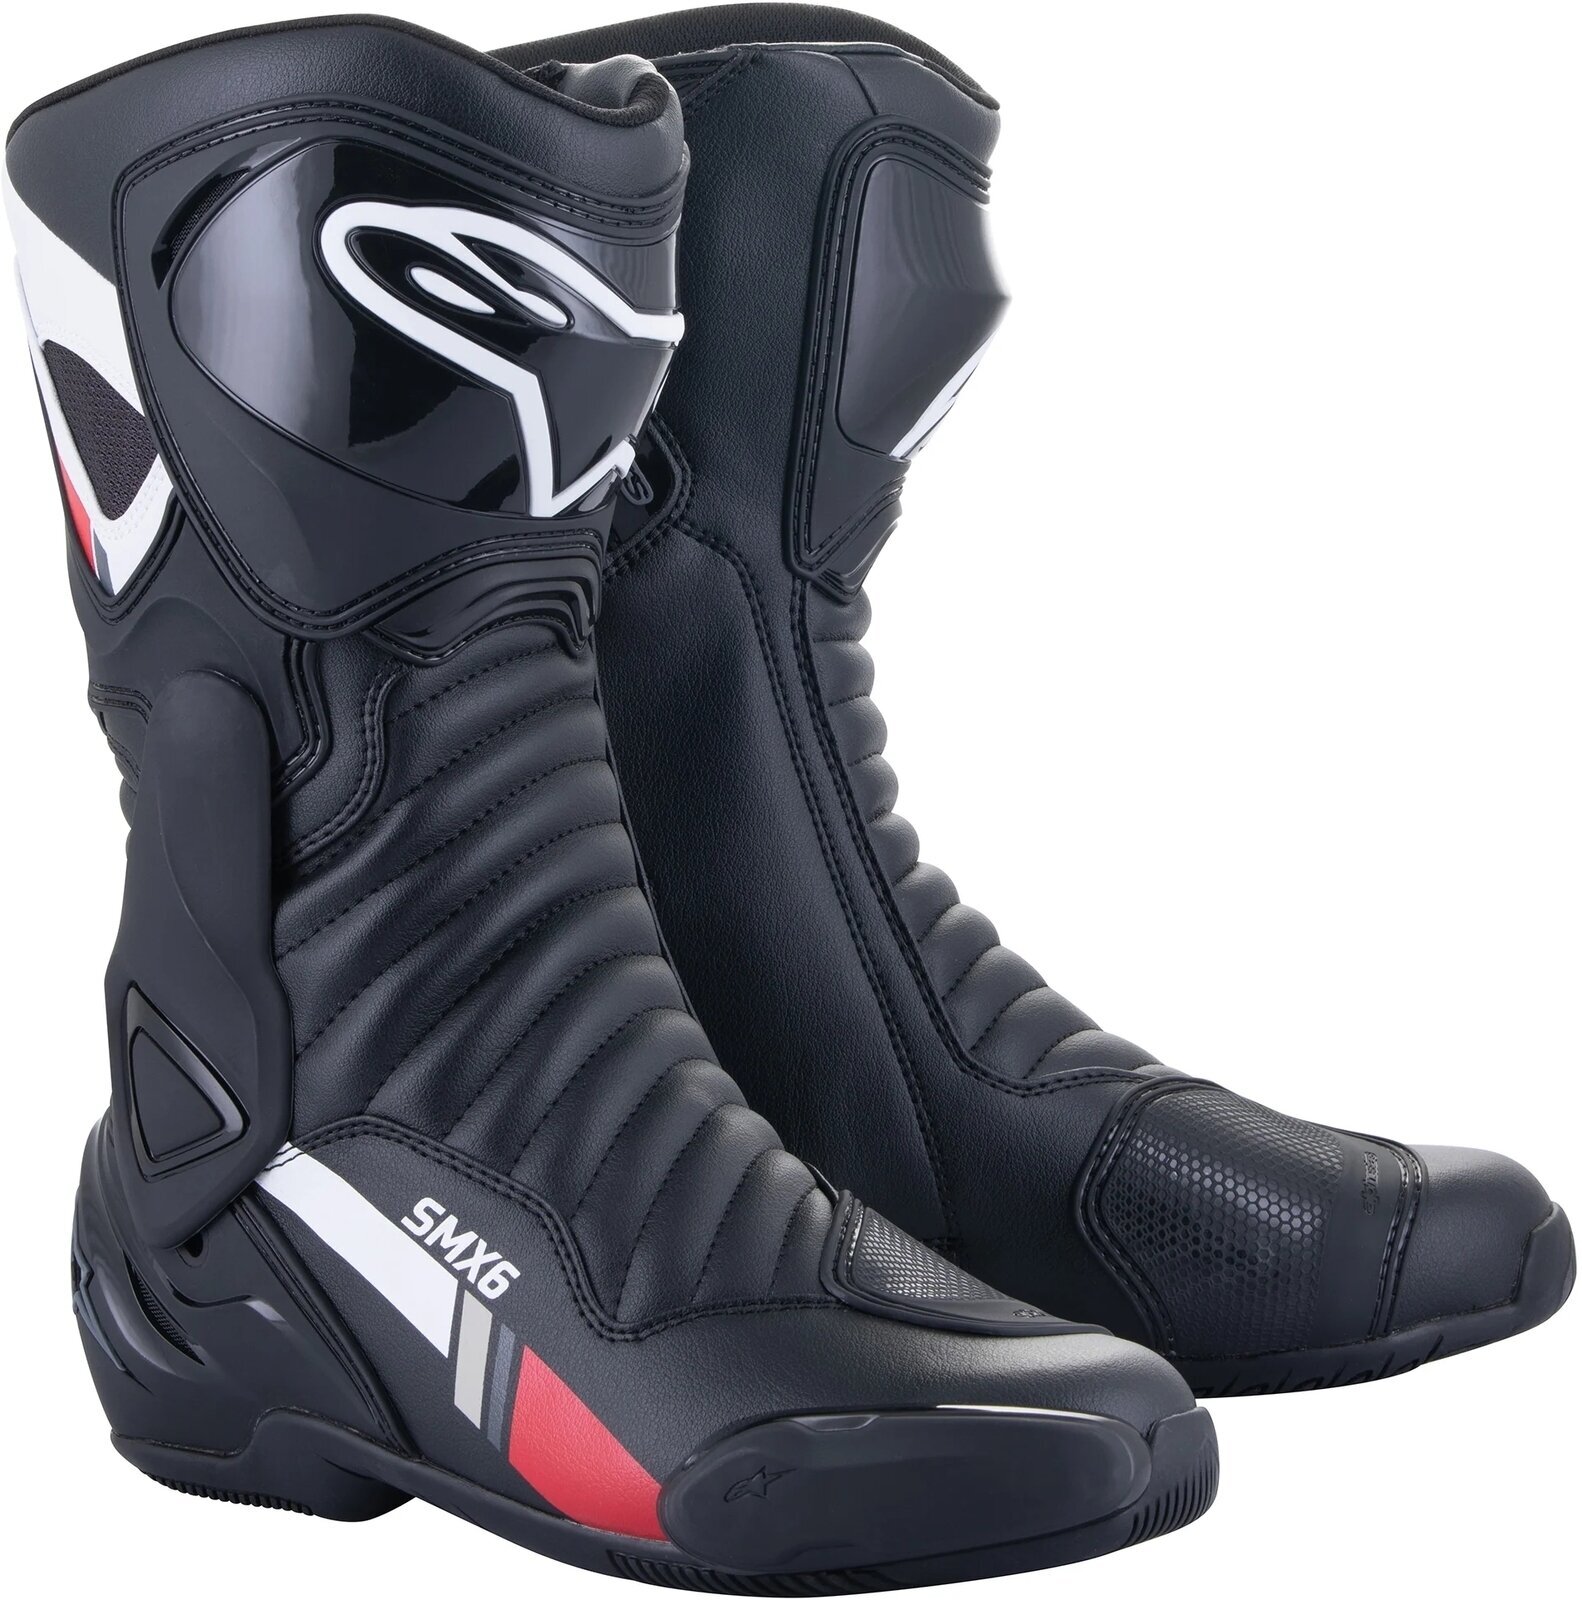 Motorcycle Boots Alpinestars SMX-6 V2 Boots Black/White/Gray 47 Motorcycle Boots